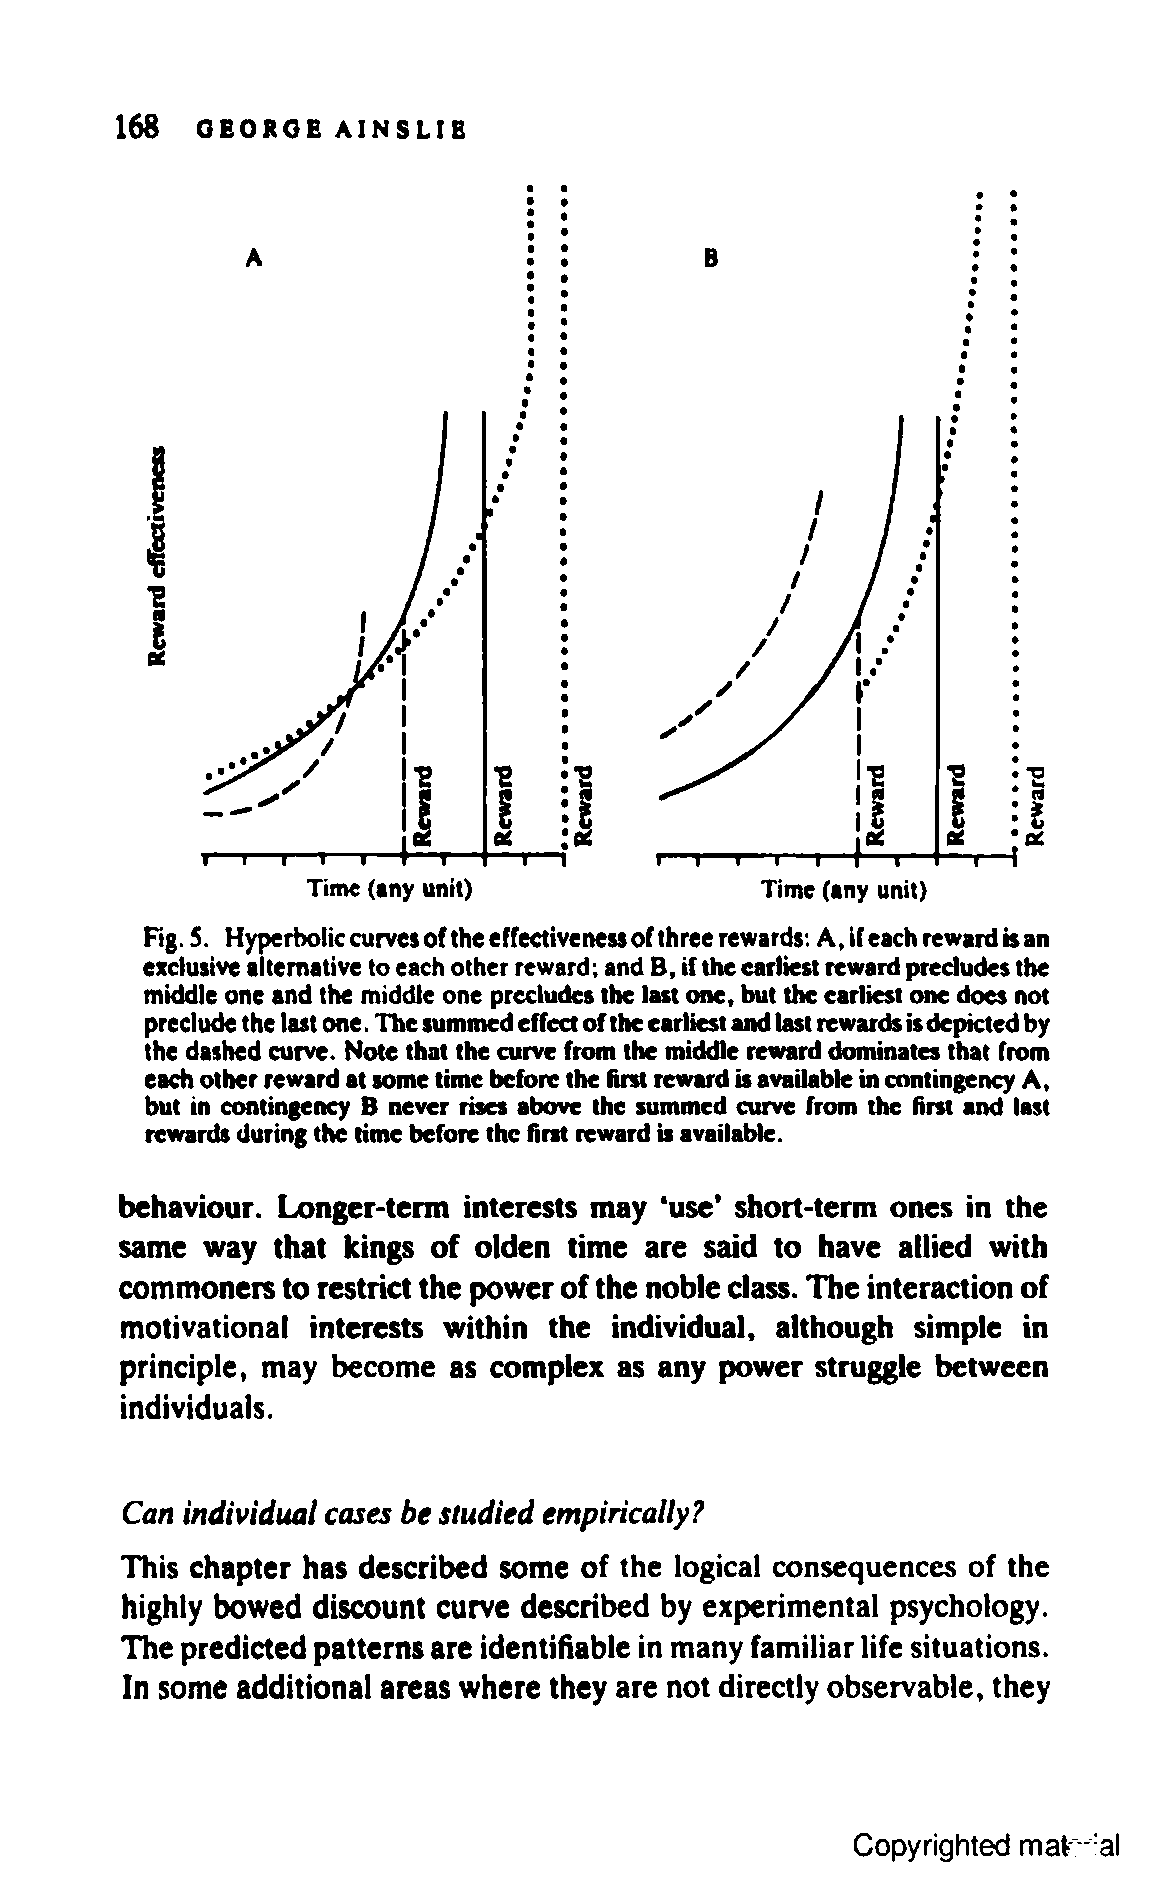 Fig. 5. Hyperbolic curves of the effectiveness of three rewards A, if each reward is an exclusive alternative to each other reward and B, if the earliest reward predudes the middle one and the middle one precludes the last one, but the earliest one does not preclude the last one. The summed effect of the earliest and last rewards is depicted by the dashed curve. Note that the curve from the middle reward dominates that from each other reward at some time before the first reward is available in contingency A, but in contingency never rises above the summed curve from the first and last rewards during the time before the first reward is available.